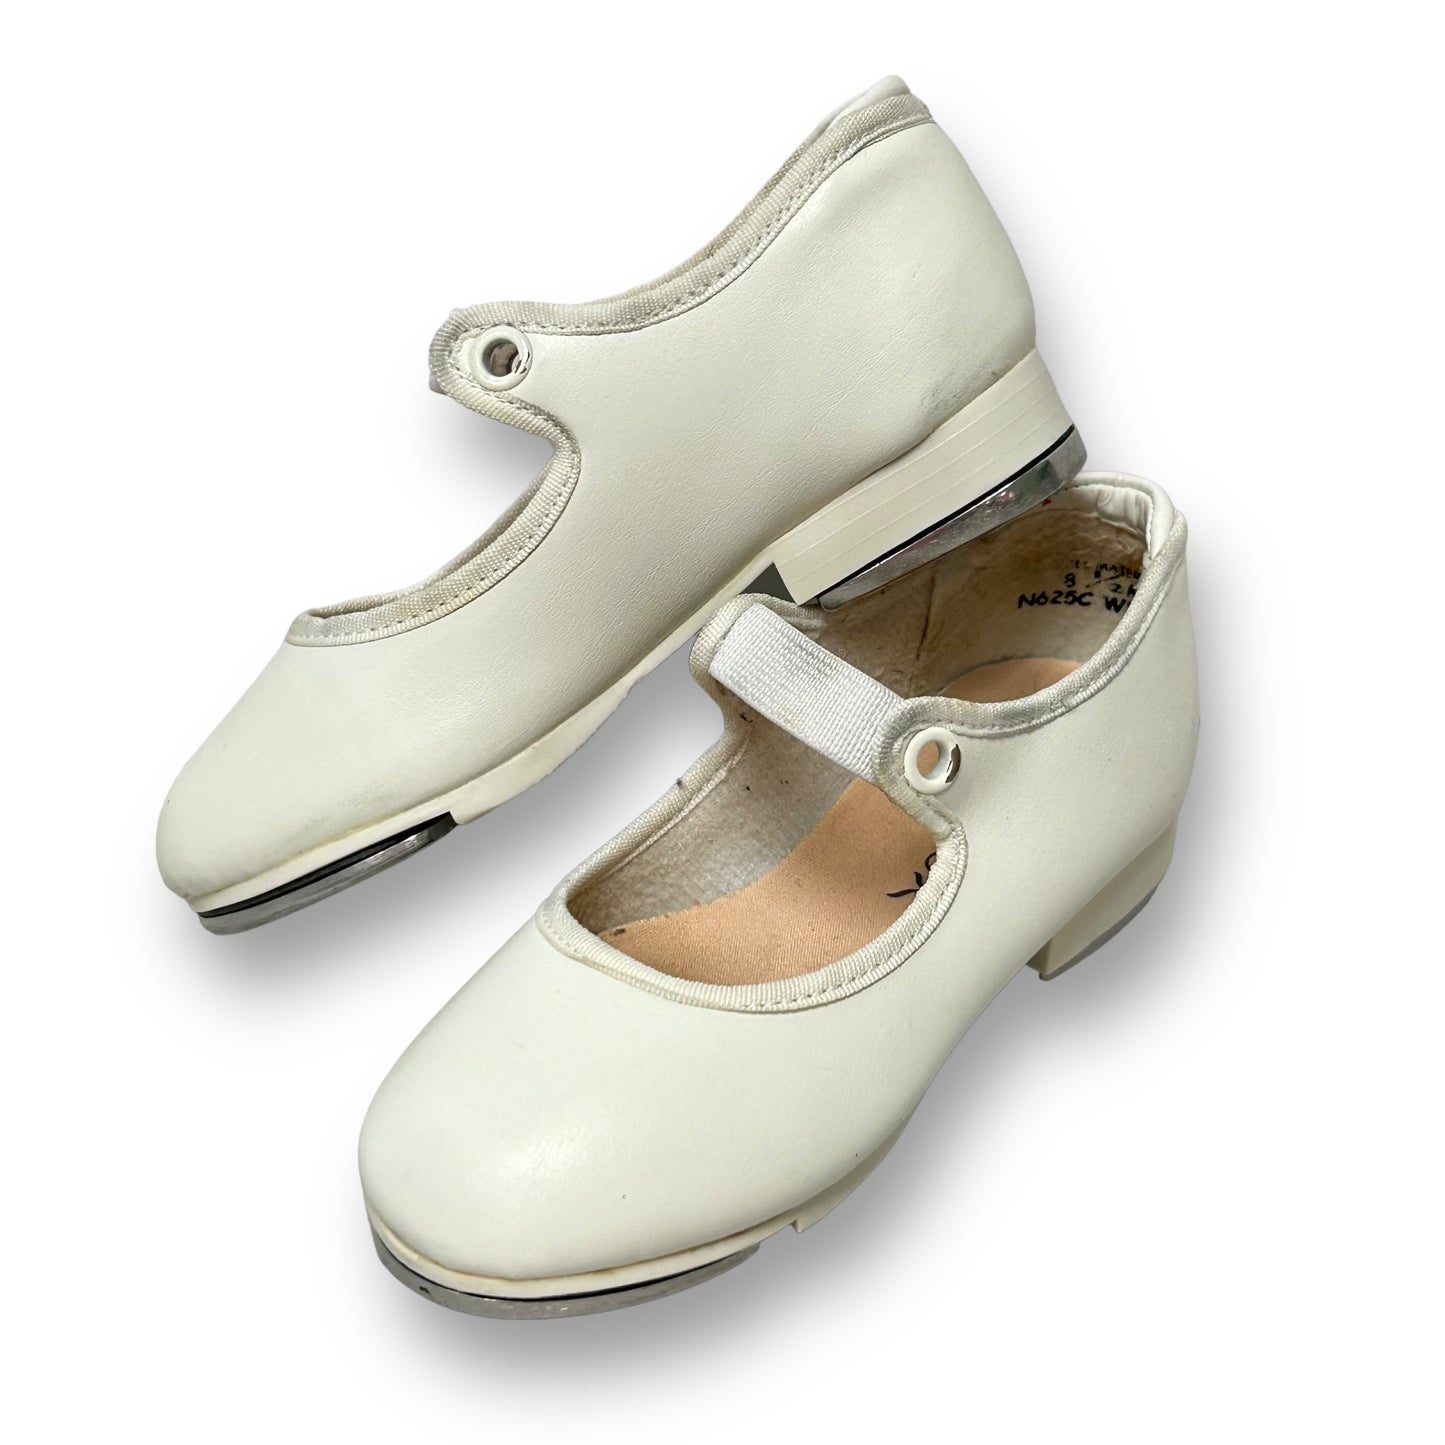 Capezio Toddler Girl Size 8.5 White Slide-On Tap Shoes